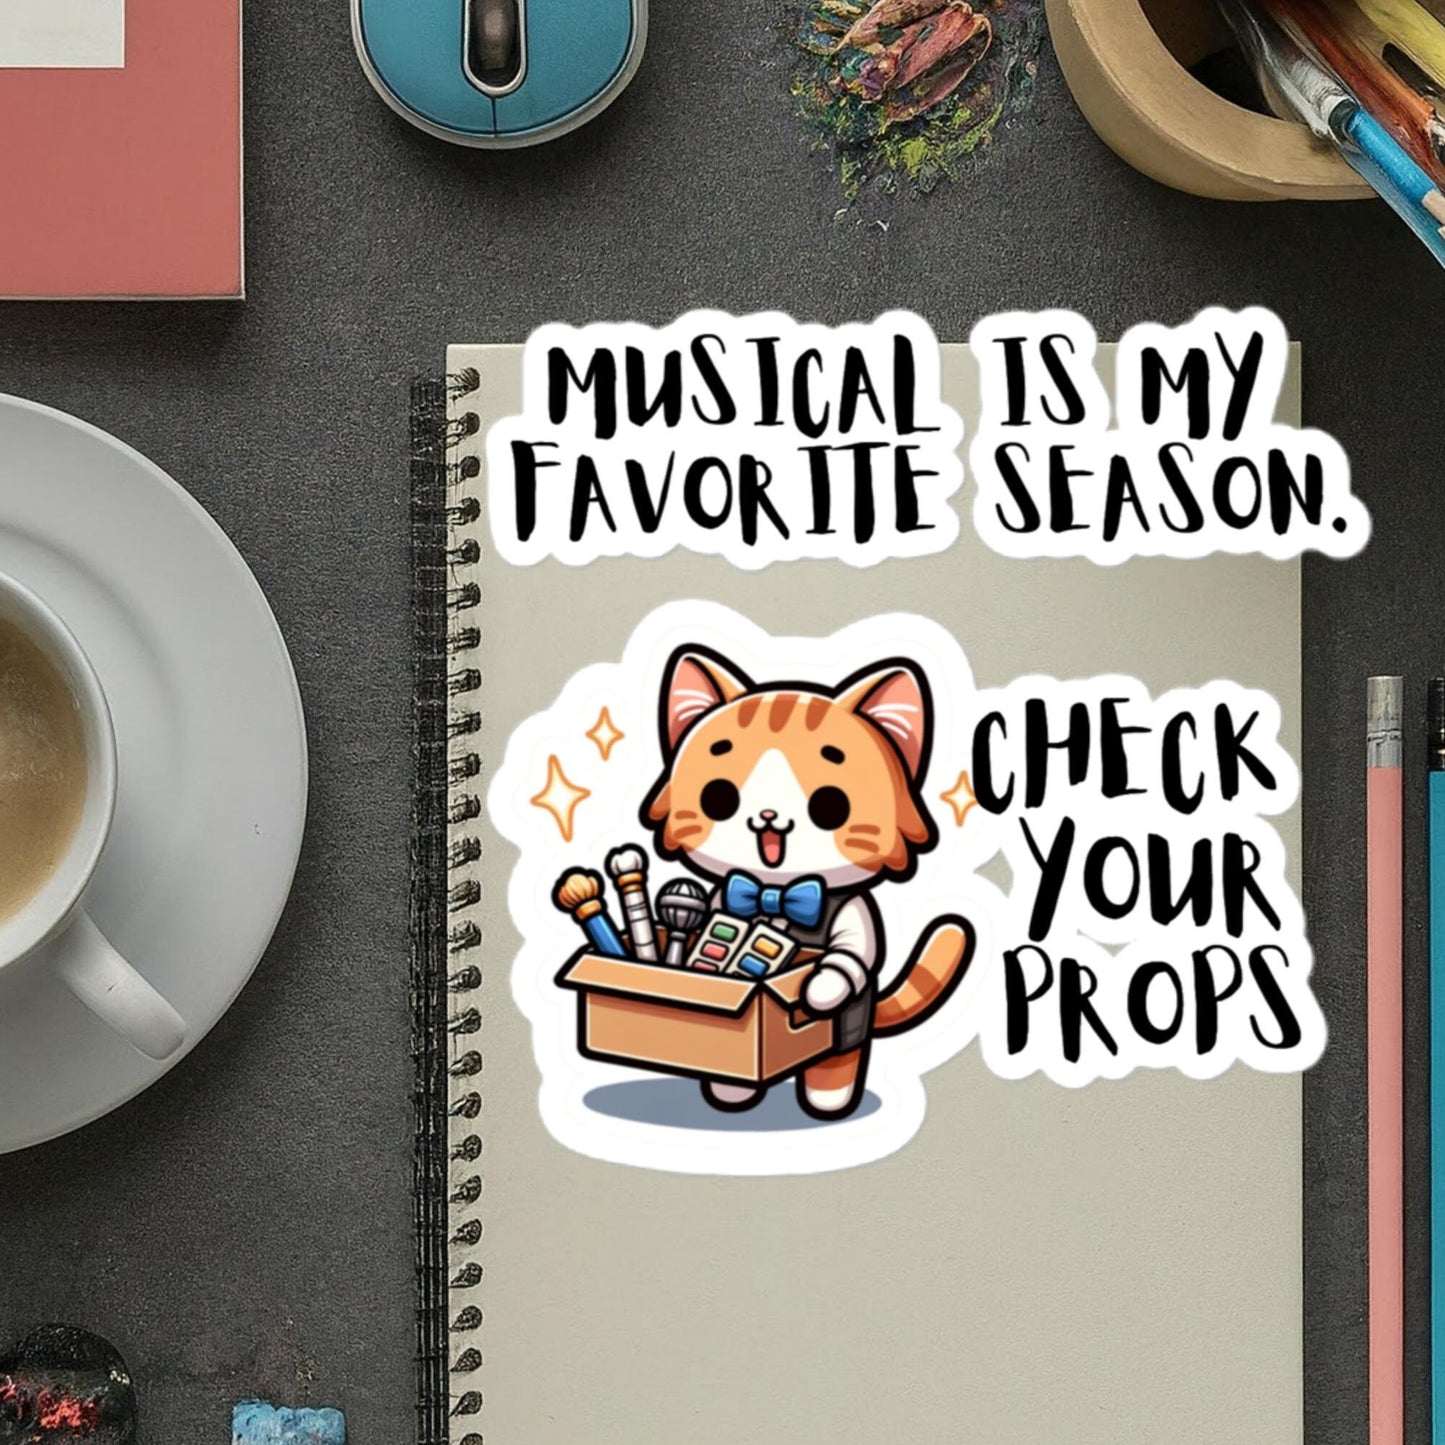 Check Your Props Theater Stickers Backstage crew stickers Musical is my favorite seasonBubble-free stickers